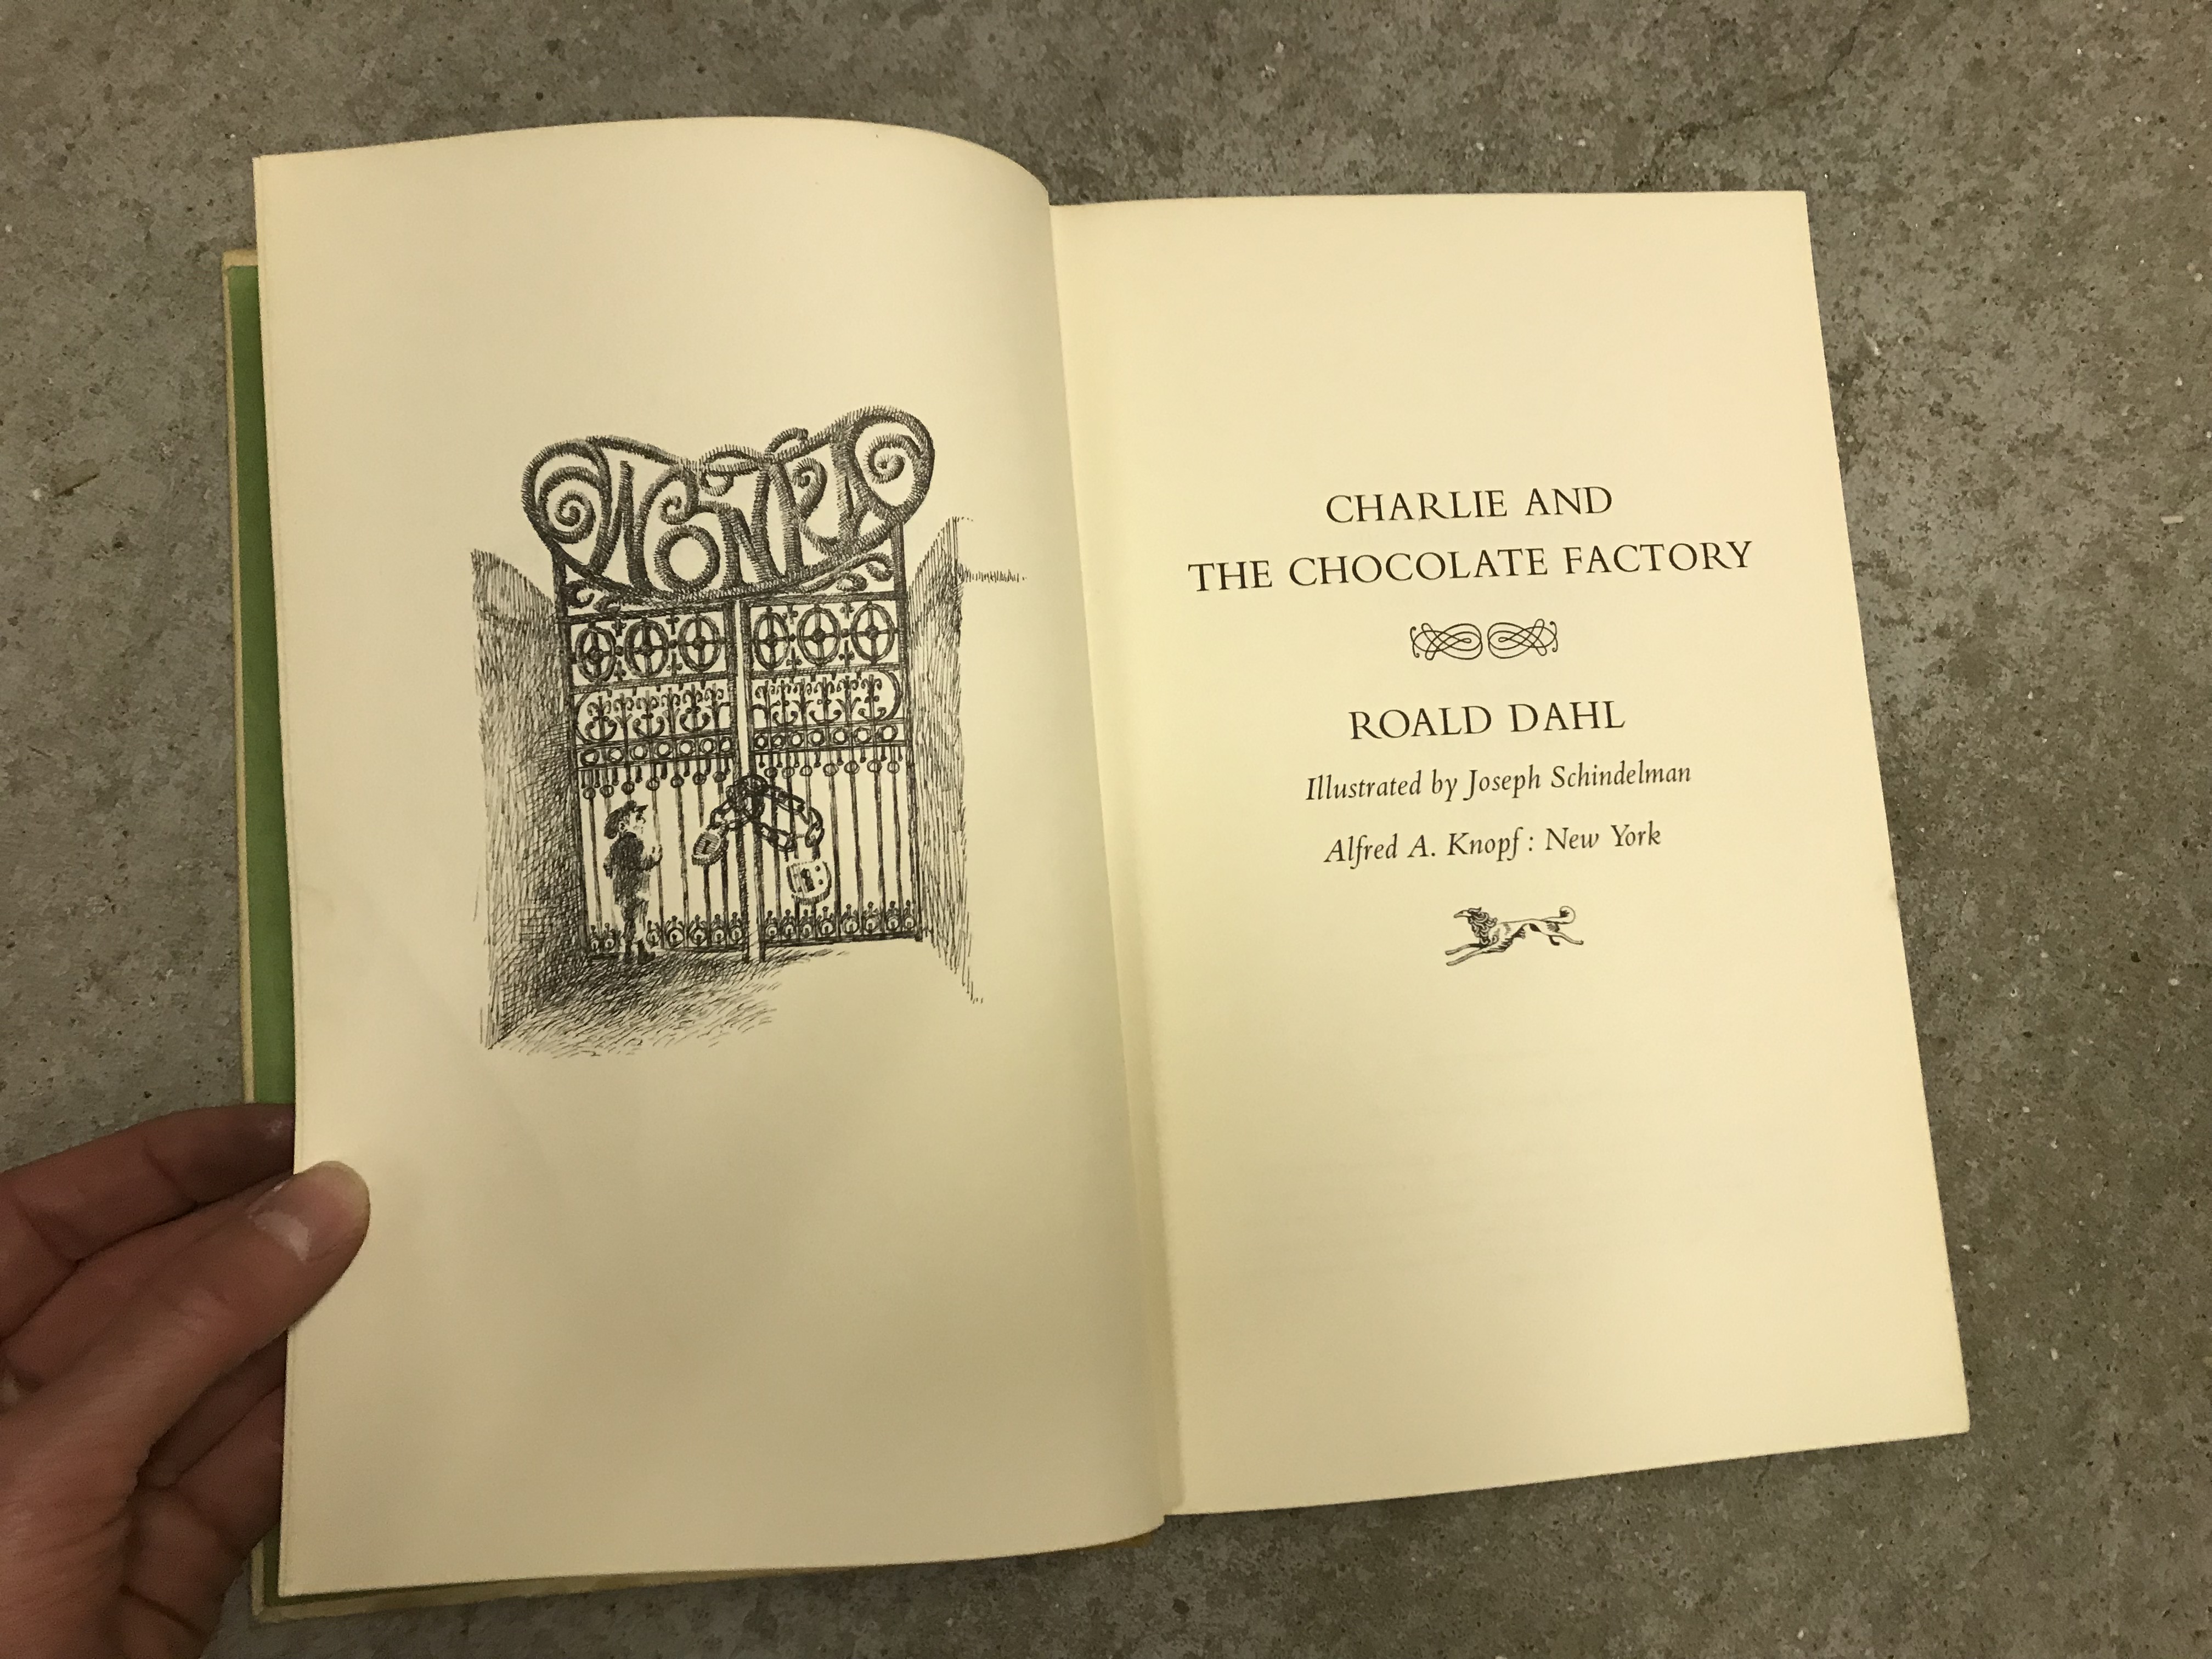 ROALD DAHL "Charlie and The Chocolate Factory", illustrated by Joseph Schindelman, published - Image 2 of 2